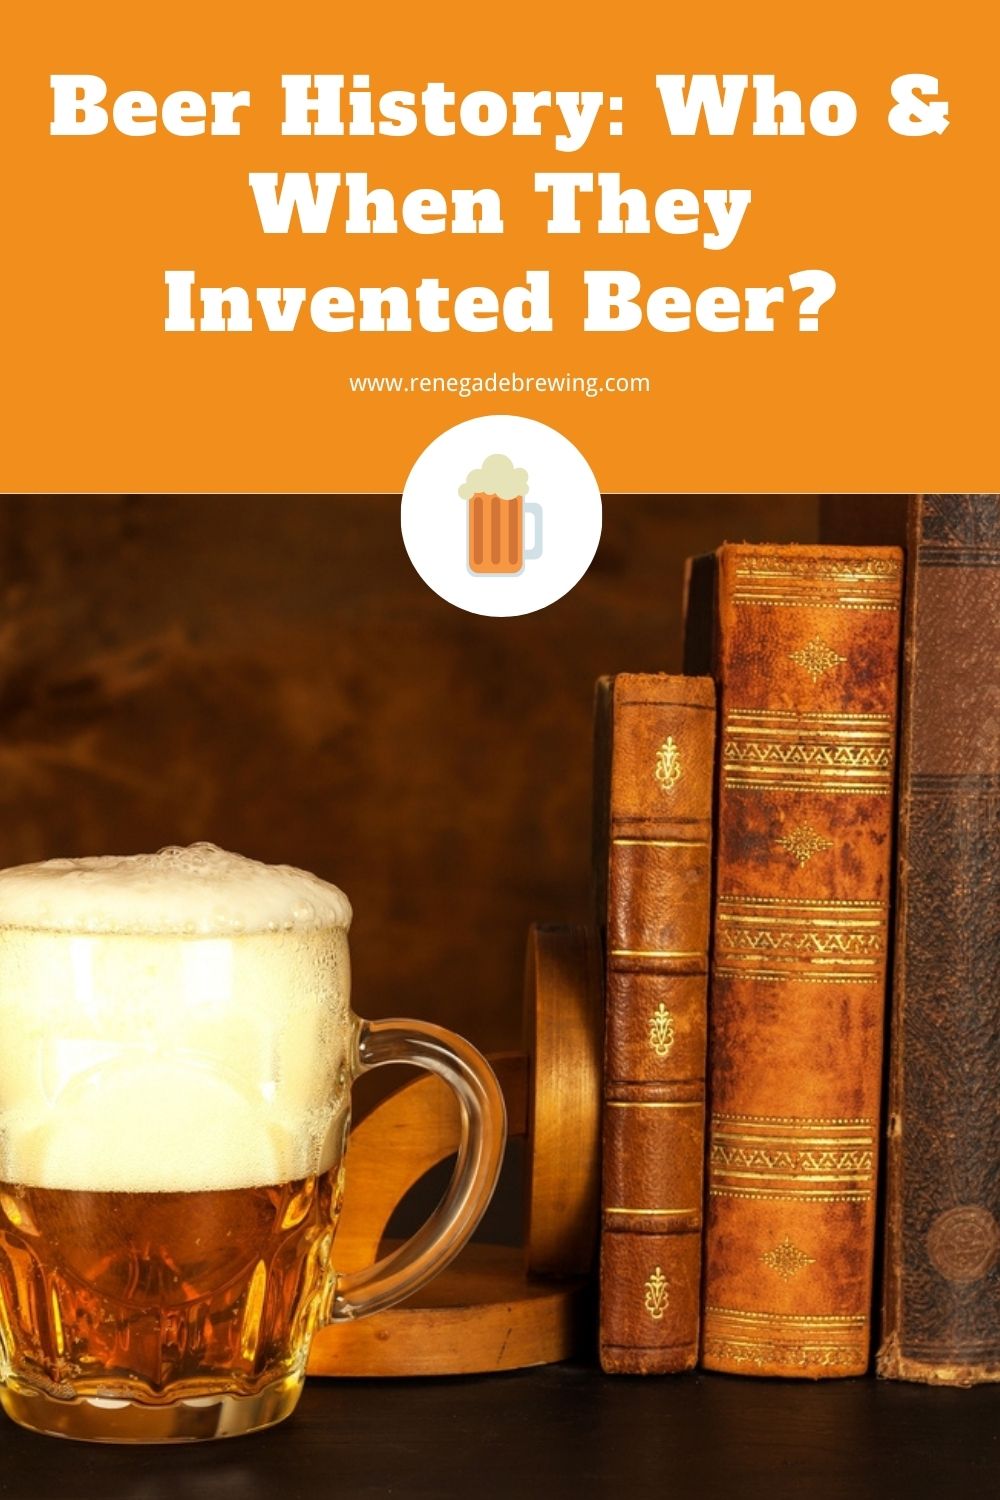 Beer History Who & When They Invented Beer 2